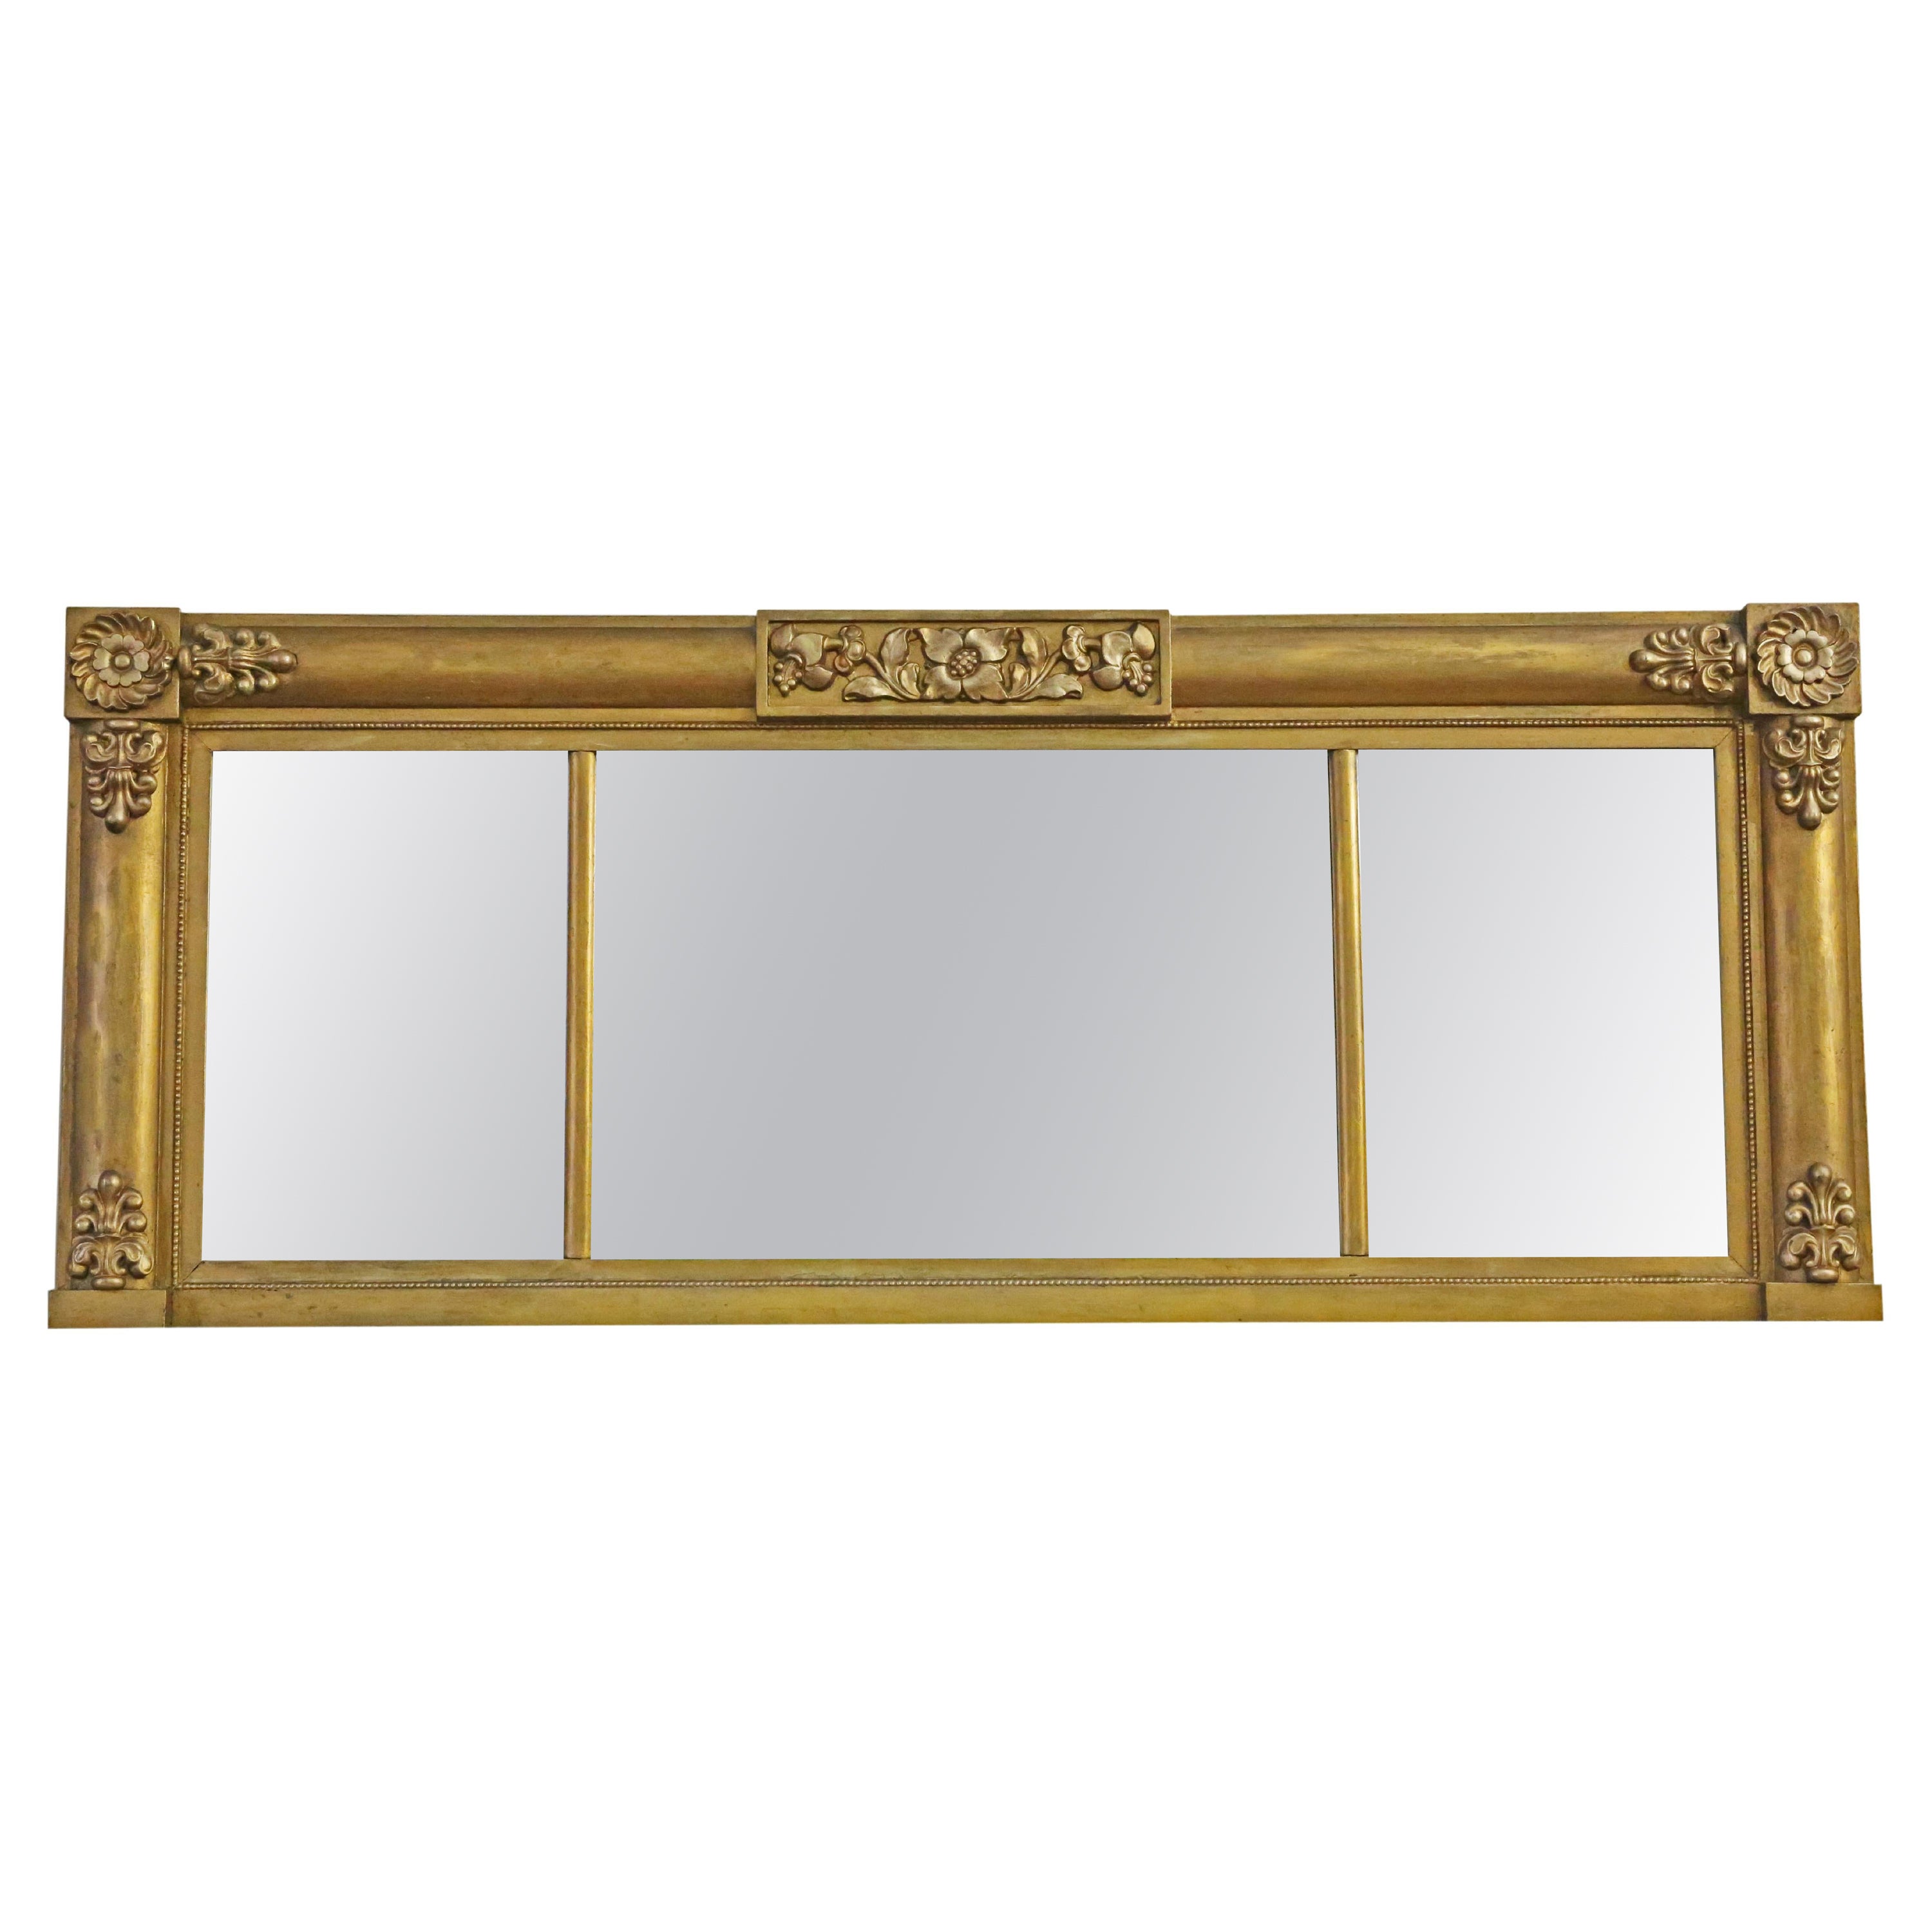 Antique large gilt overmantle wall mirror 19th Century fine quality For Sale